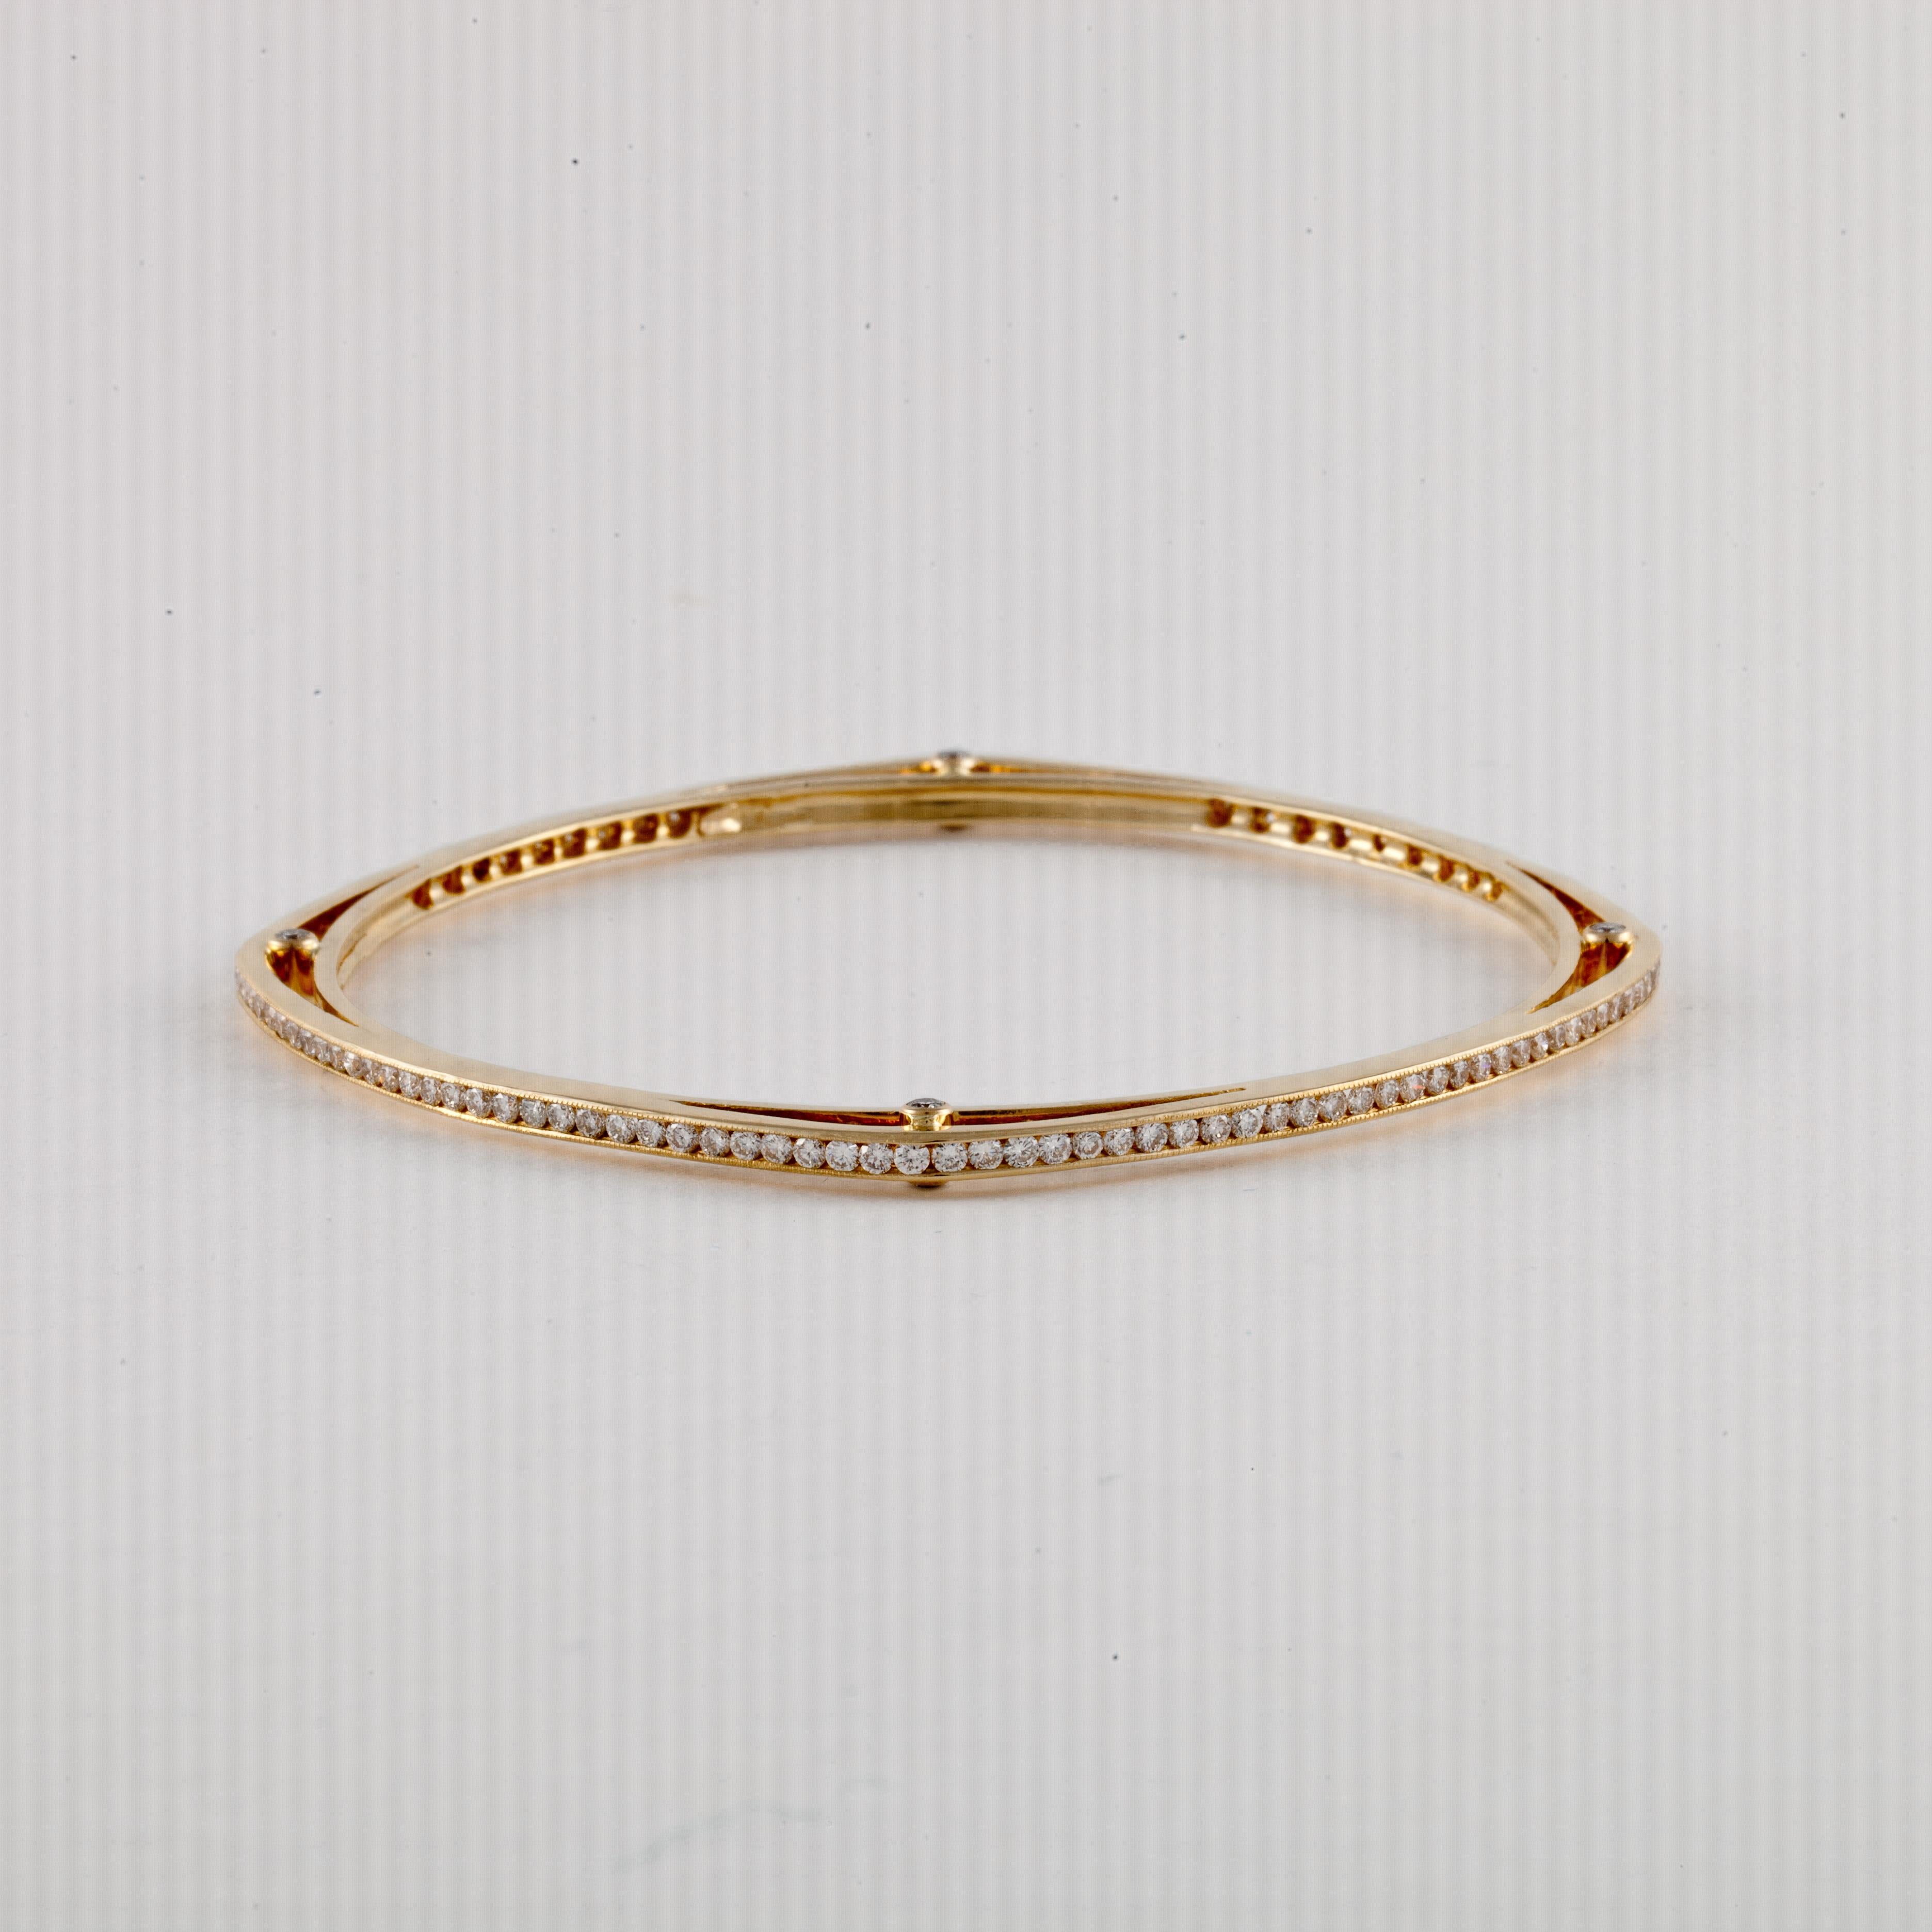 18K yellow gold bangle bracelet set with diamonds.  The shape is a rounded square with a diamond in each corner.  In addition there are diamonds encircling the bracelet.  There are a total of 136 round diamonds with 2.90 carats; G-H color and